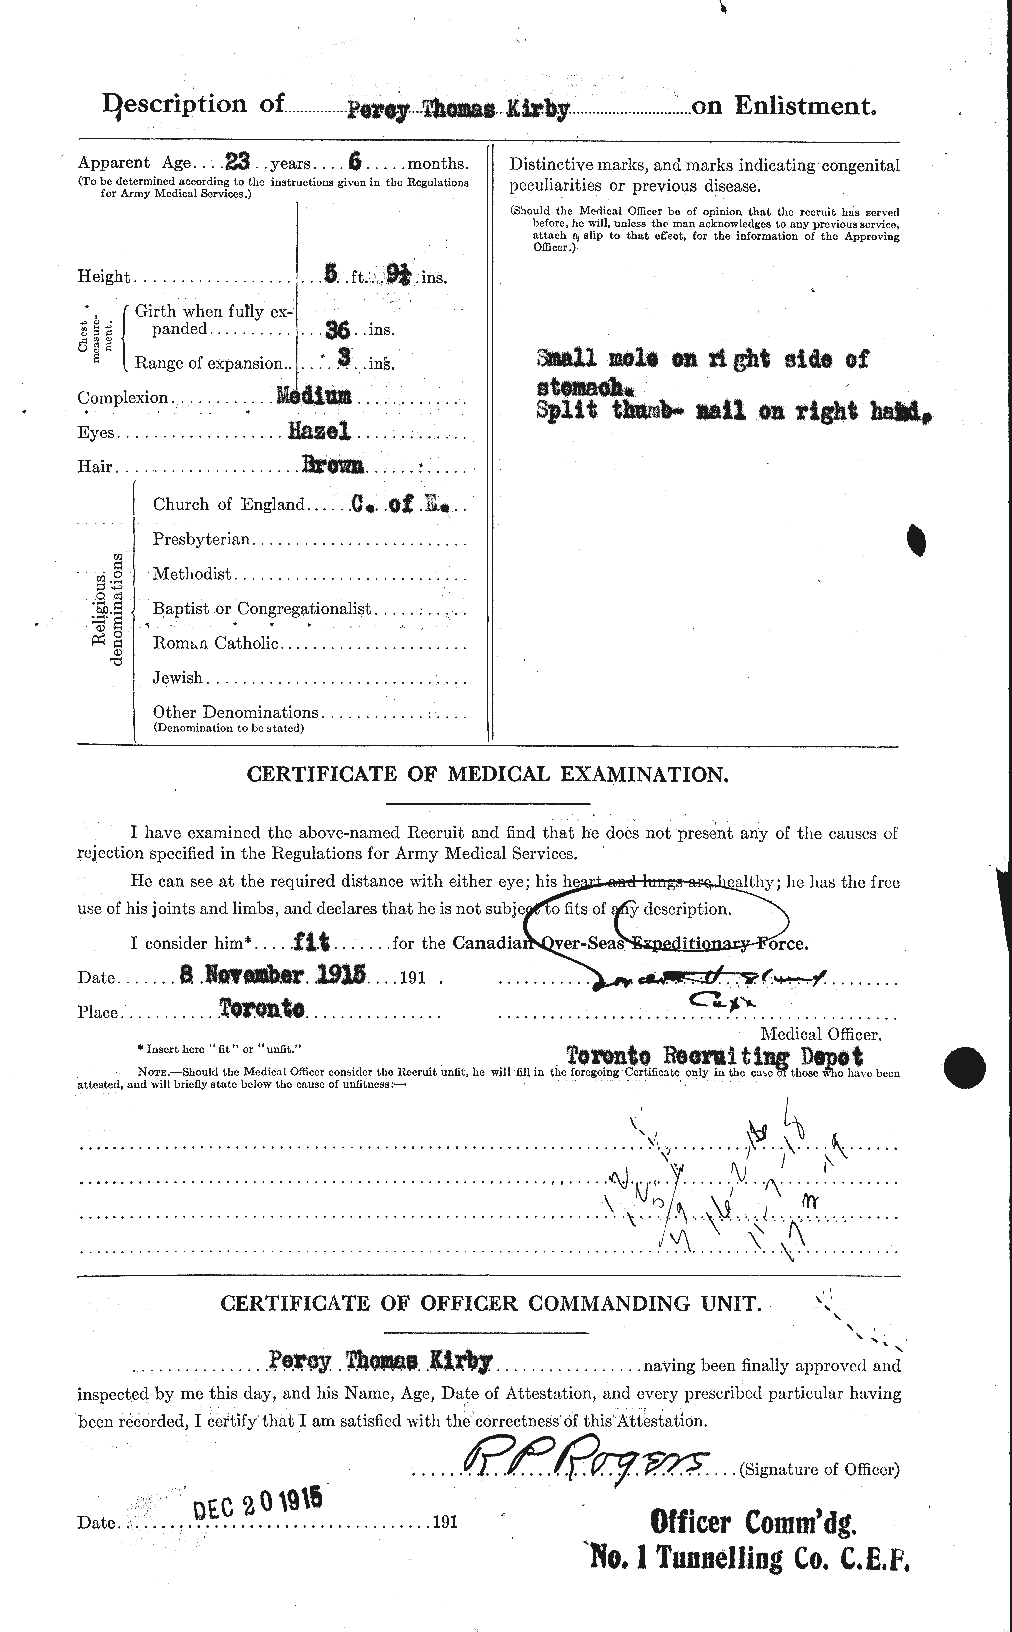 Personnel Records of the First World War - CEF 437260b